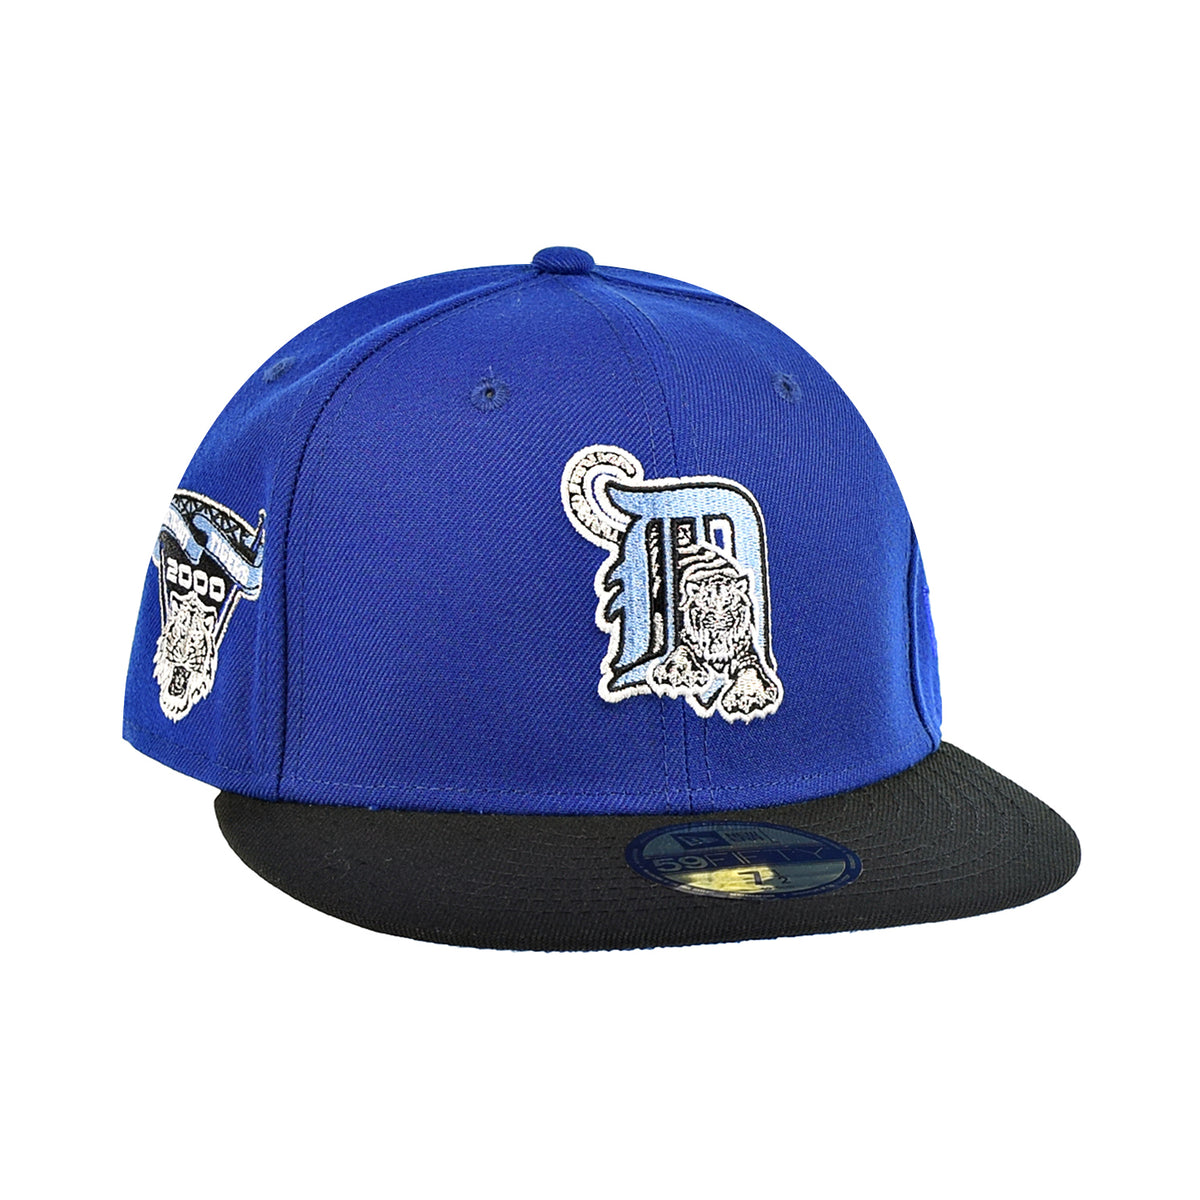 New Era Detroit Tigers 59Fifty Men's Fitted Hat Blue-Black